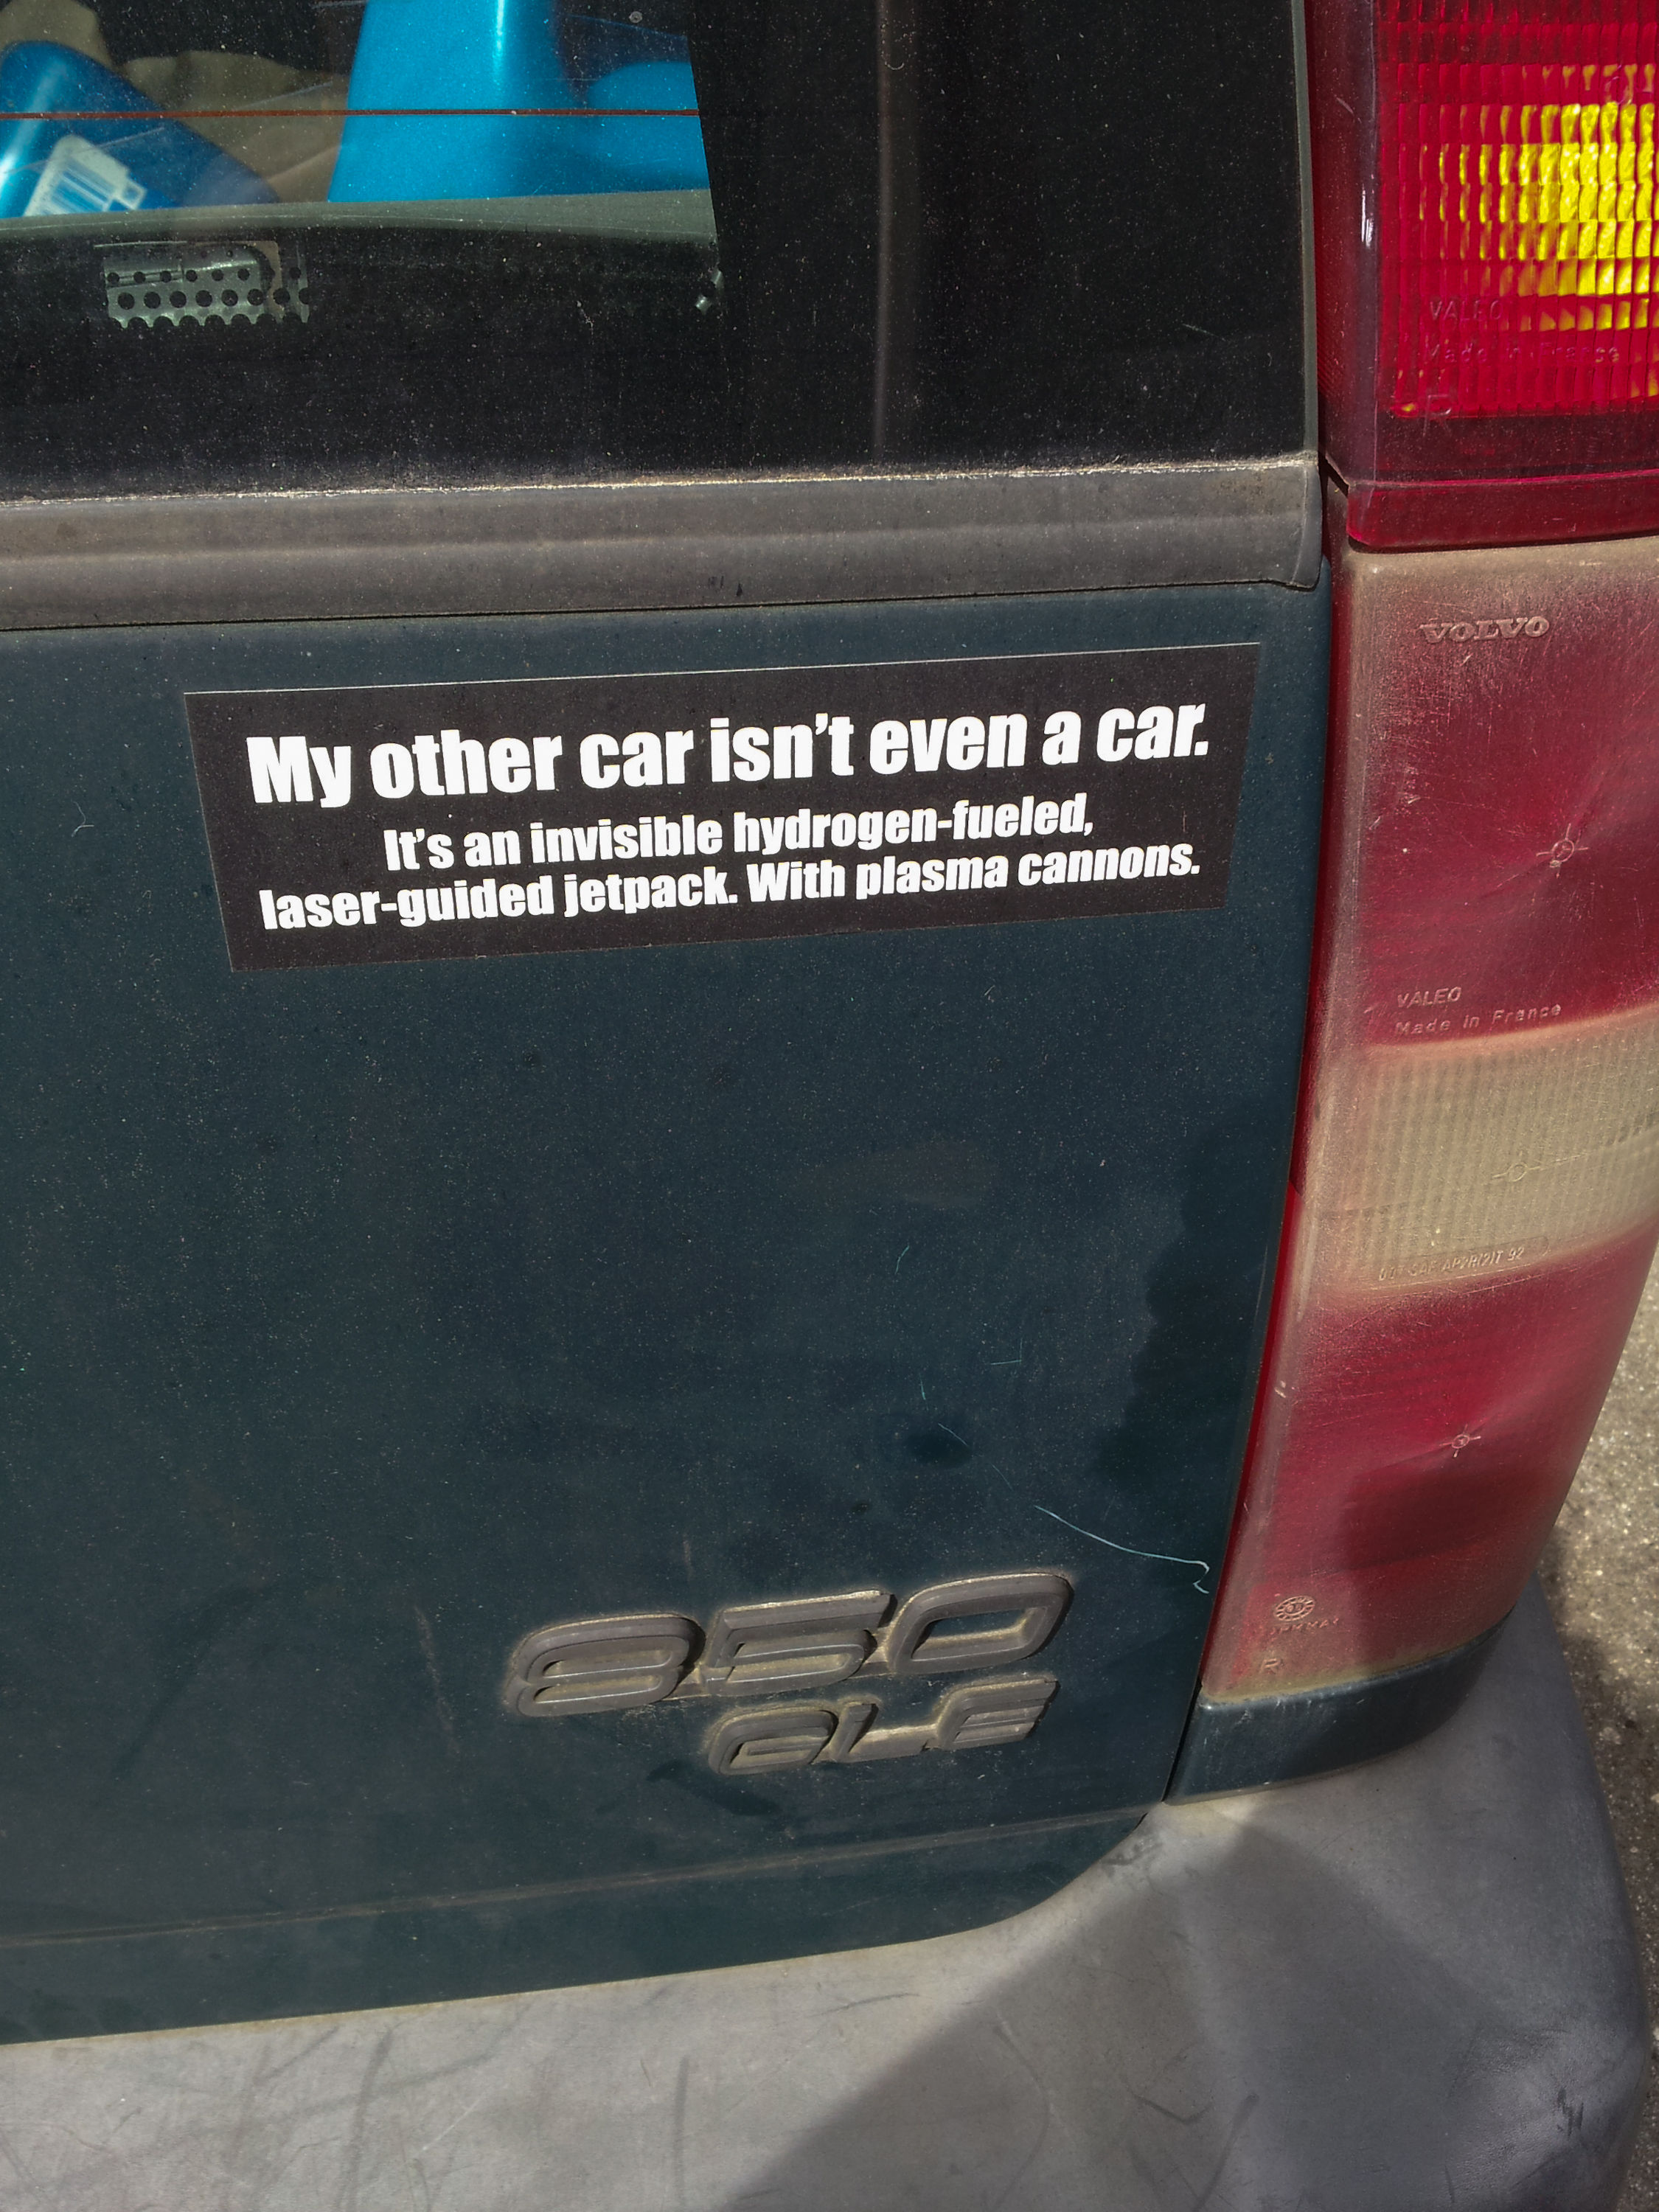 funny bumper stickers - My other car isn't even a car. It's an invisible hydrogenfueled. laserguided Jetpack. With plasma cannons.